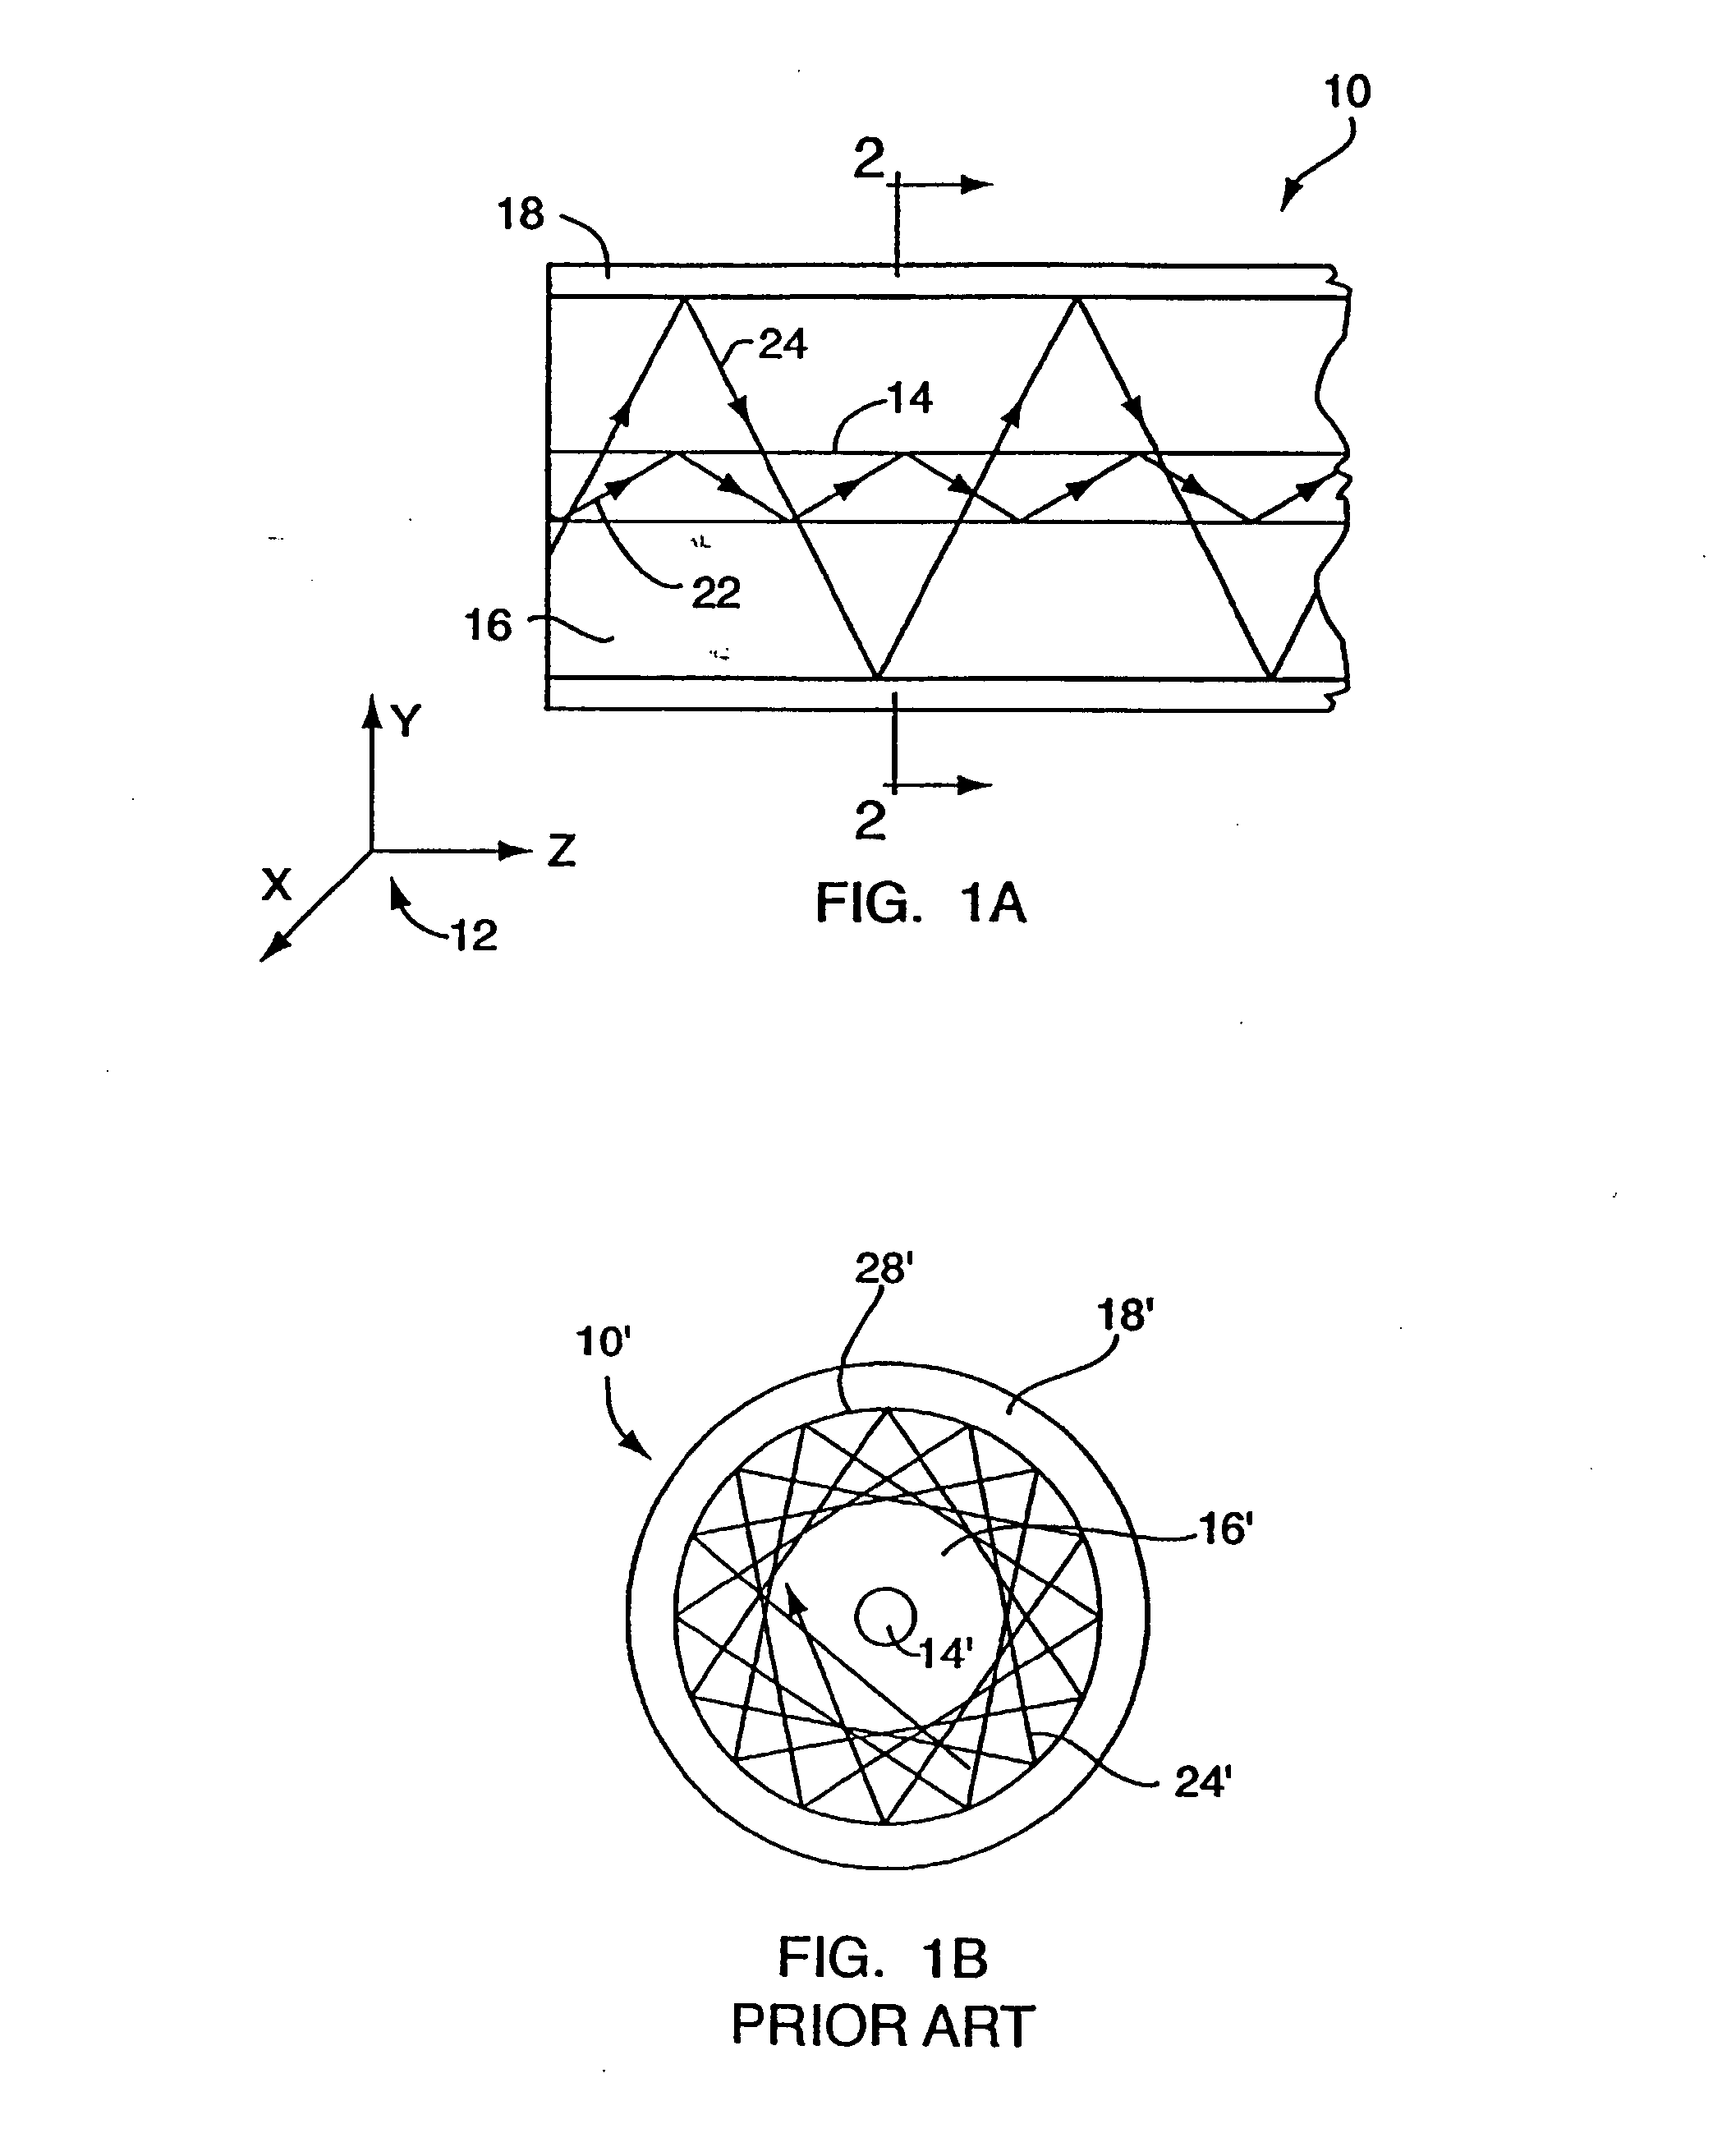 Cladding-pumped optical fiber and methods for fabricating